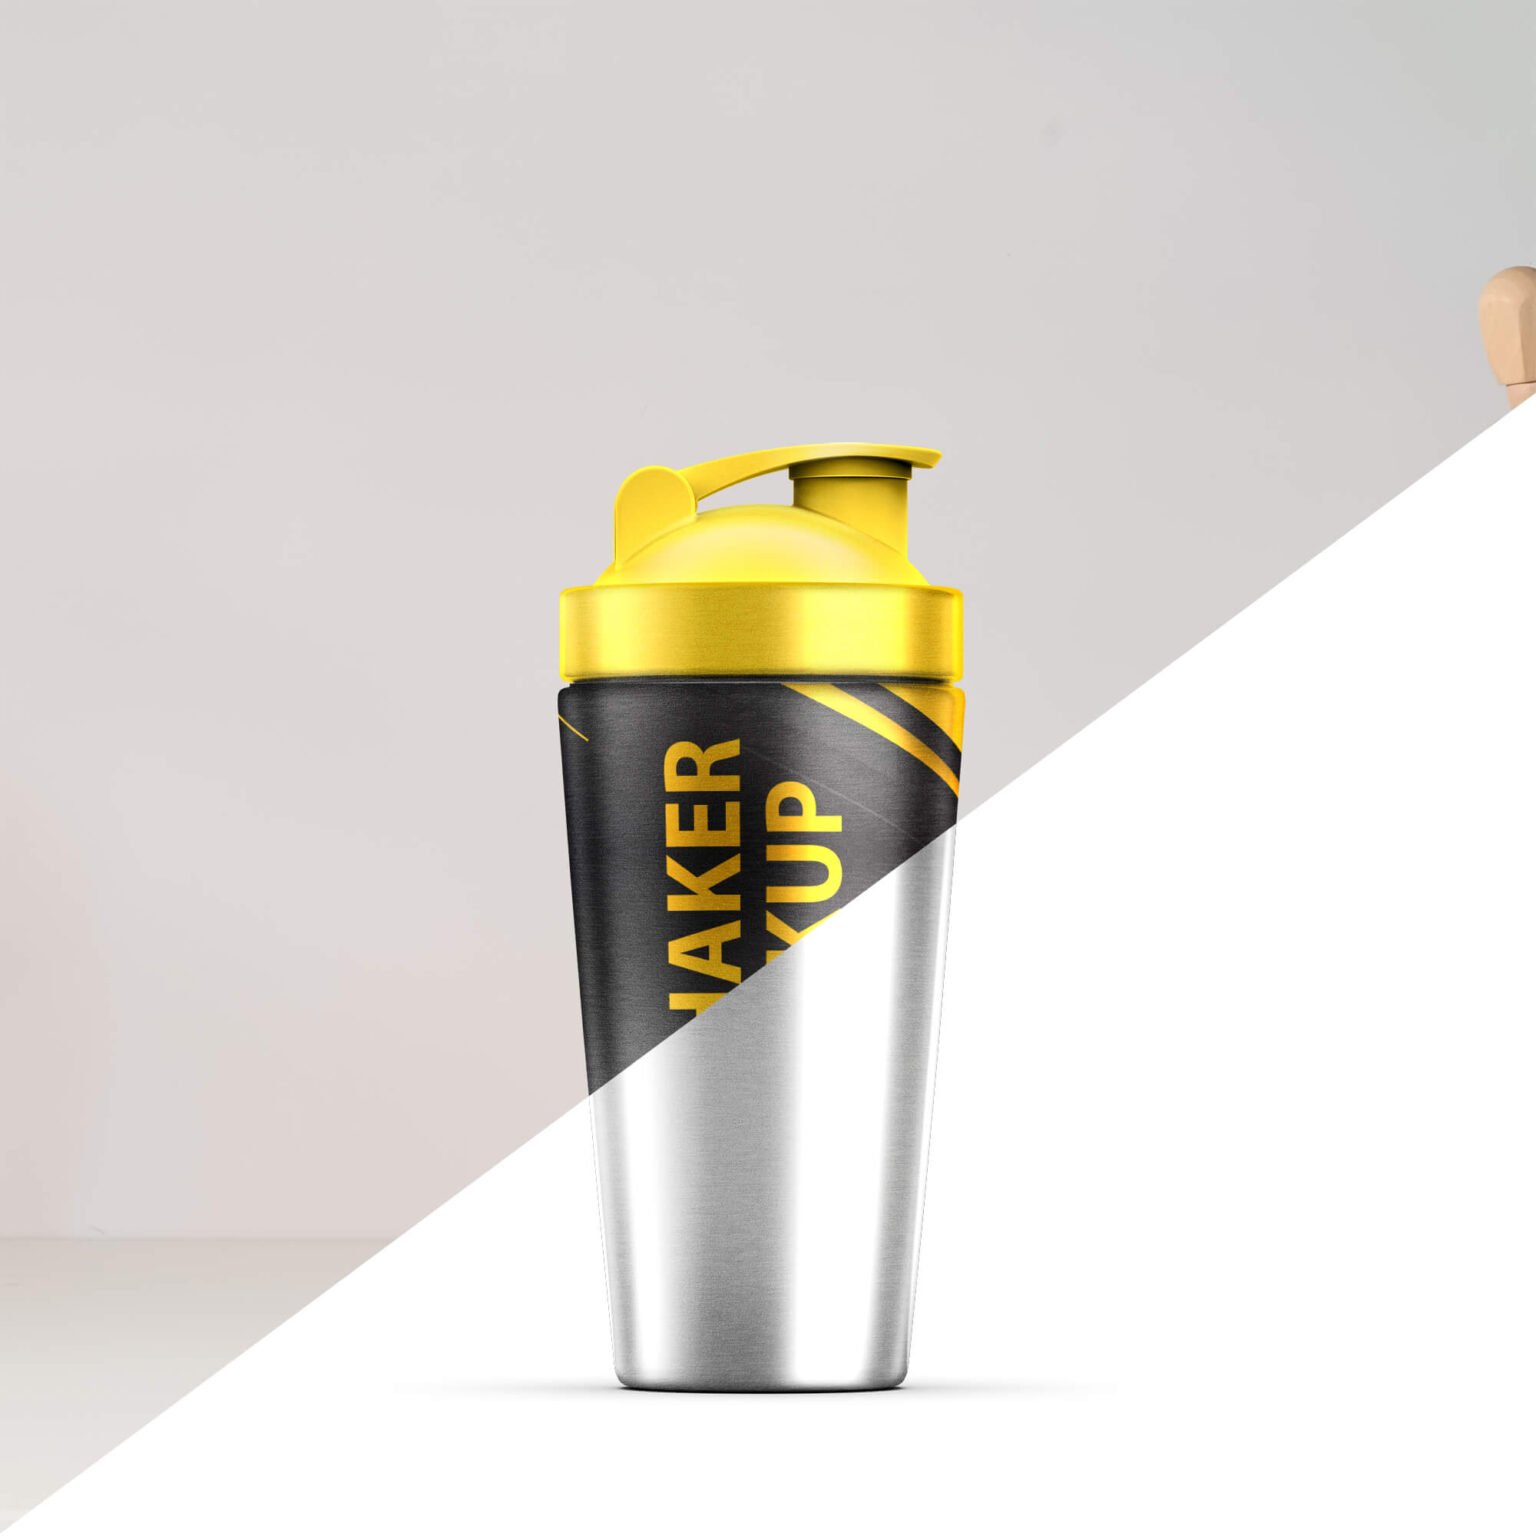 Download 35+ Best Protein Shaker Mockup PSD Template Free & Premium